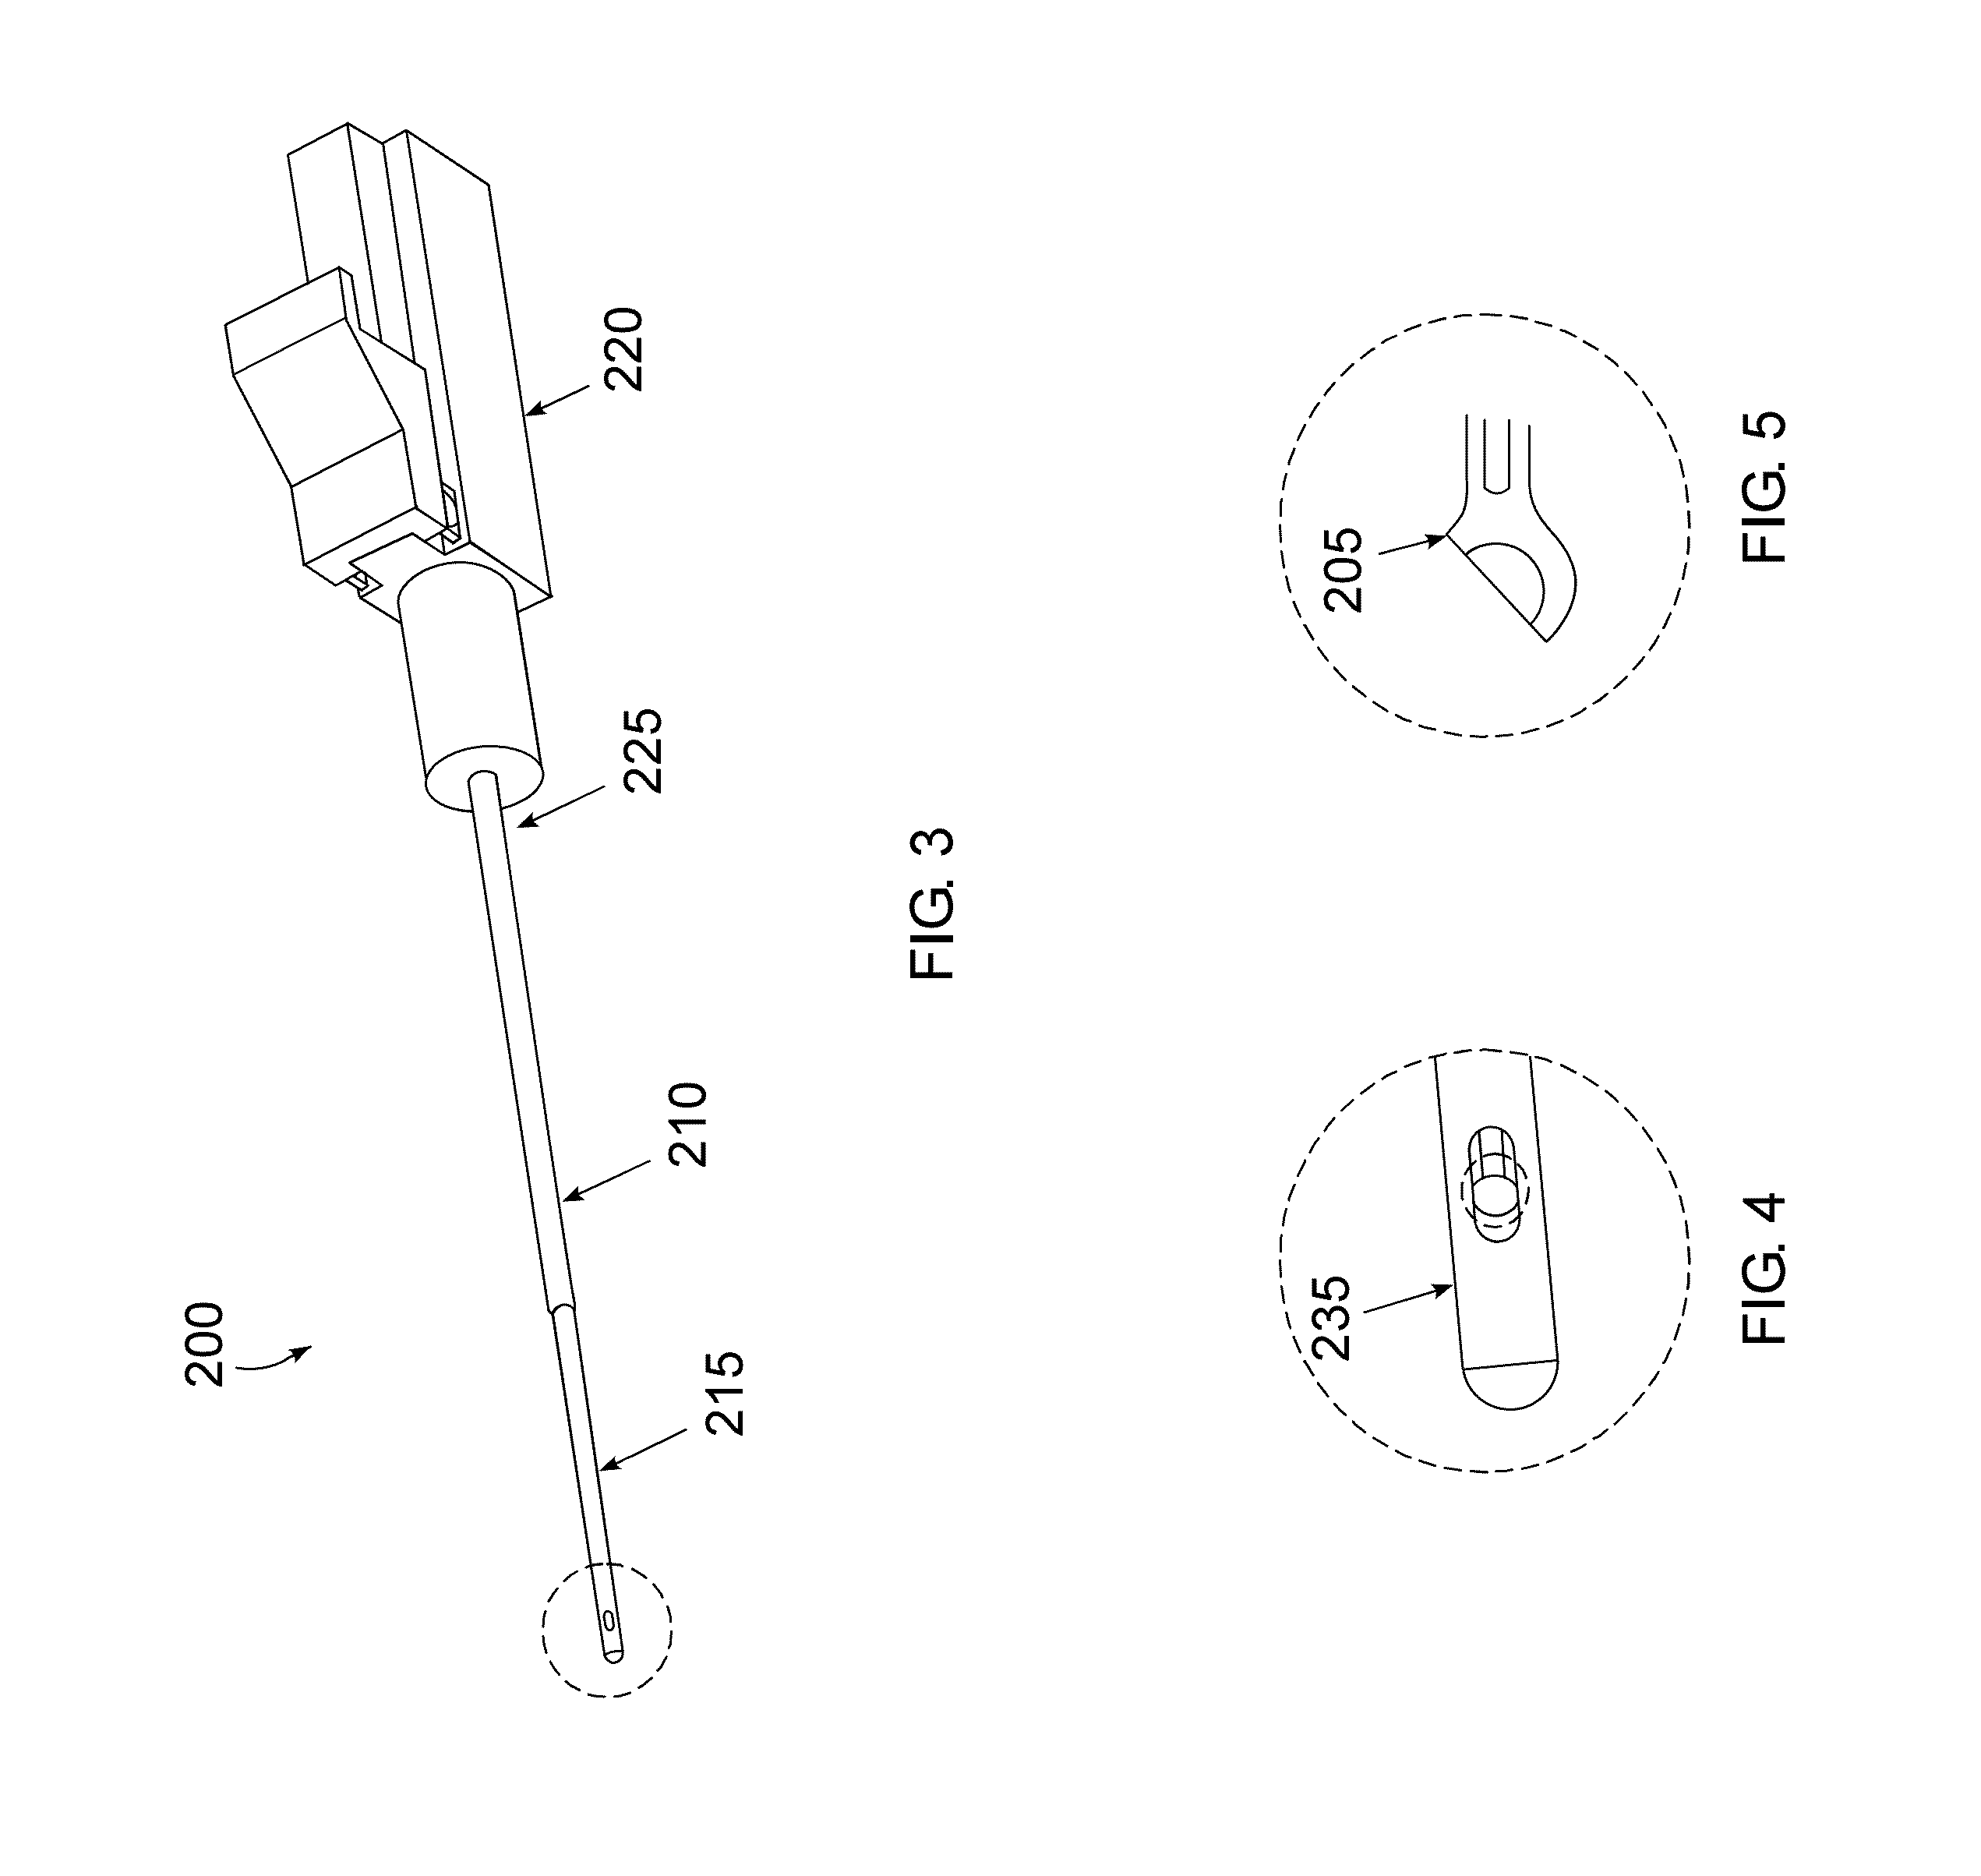 Apparatus and Method for Aiding Needle Biopsies